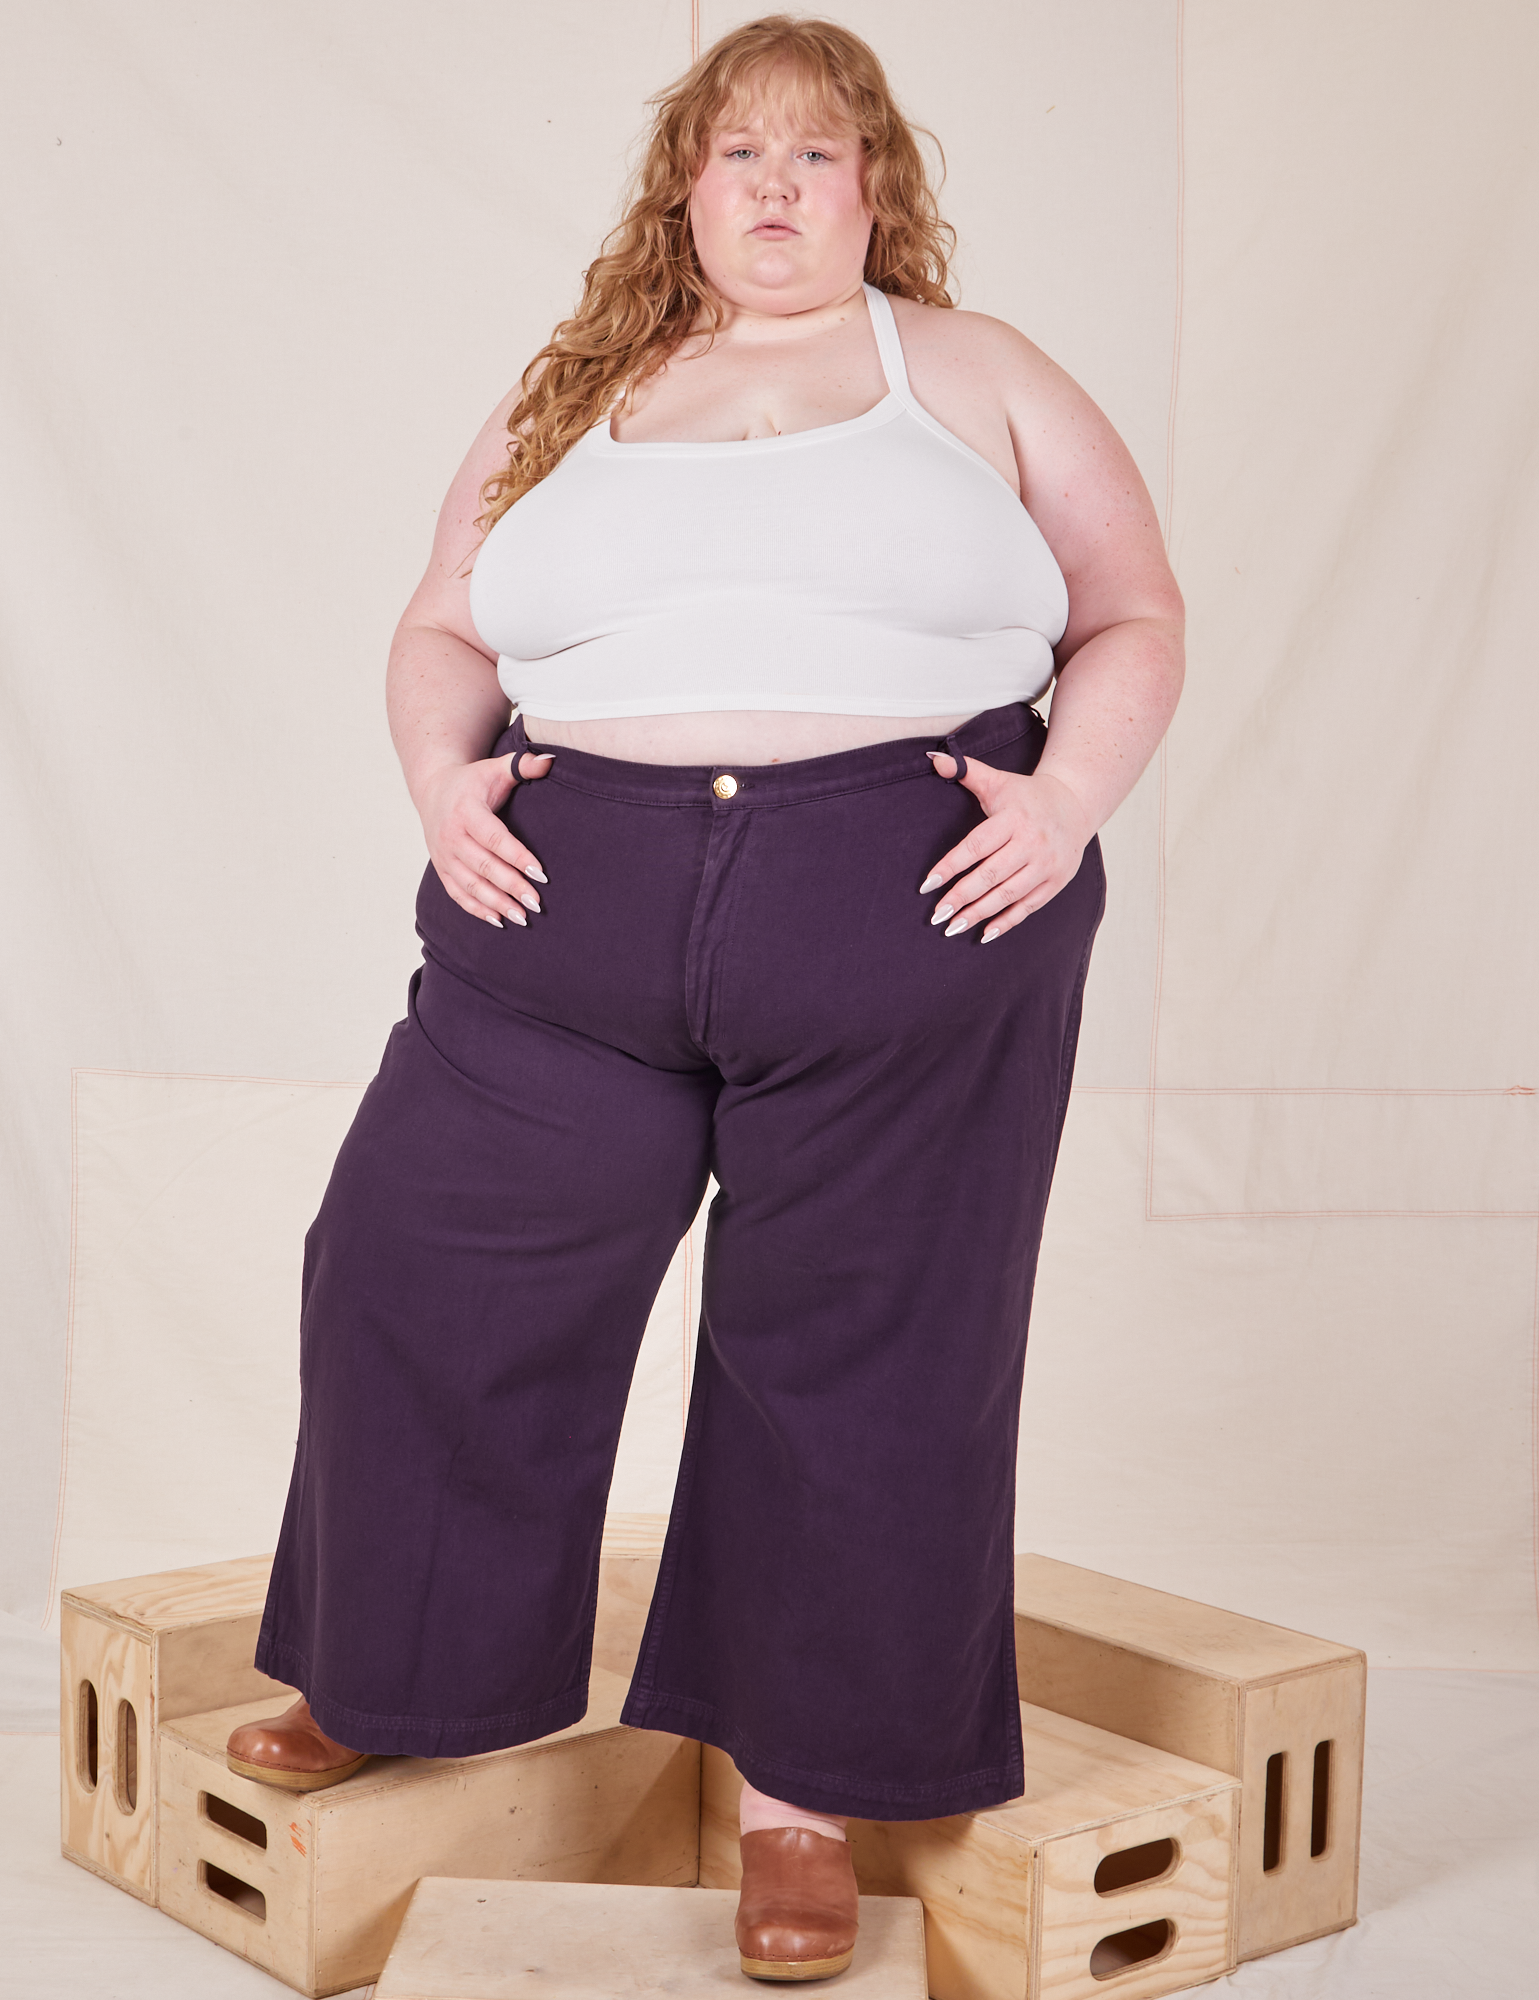 Catie is 5&#39;11&quot; and wearing 5XL Bell Bottoms in Nebula Purple paired with vintage off-white Halter Top